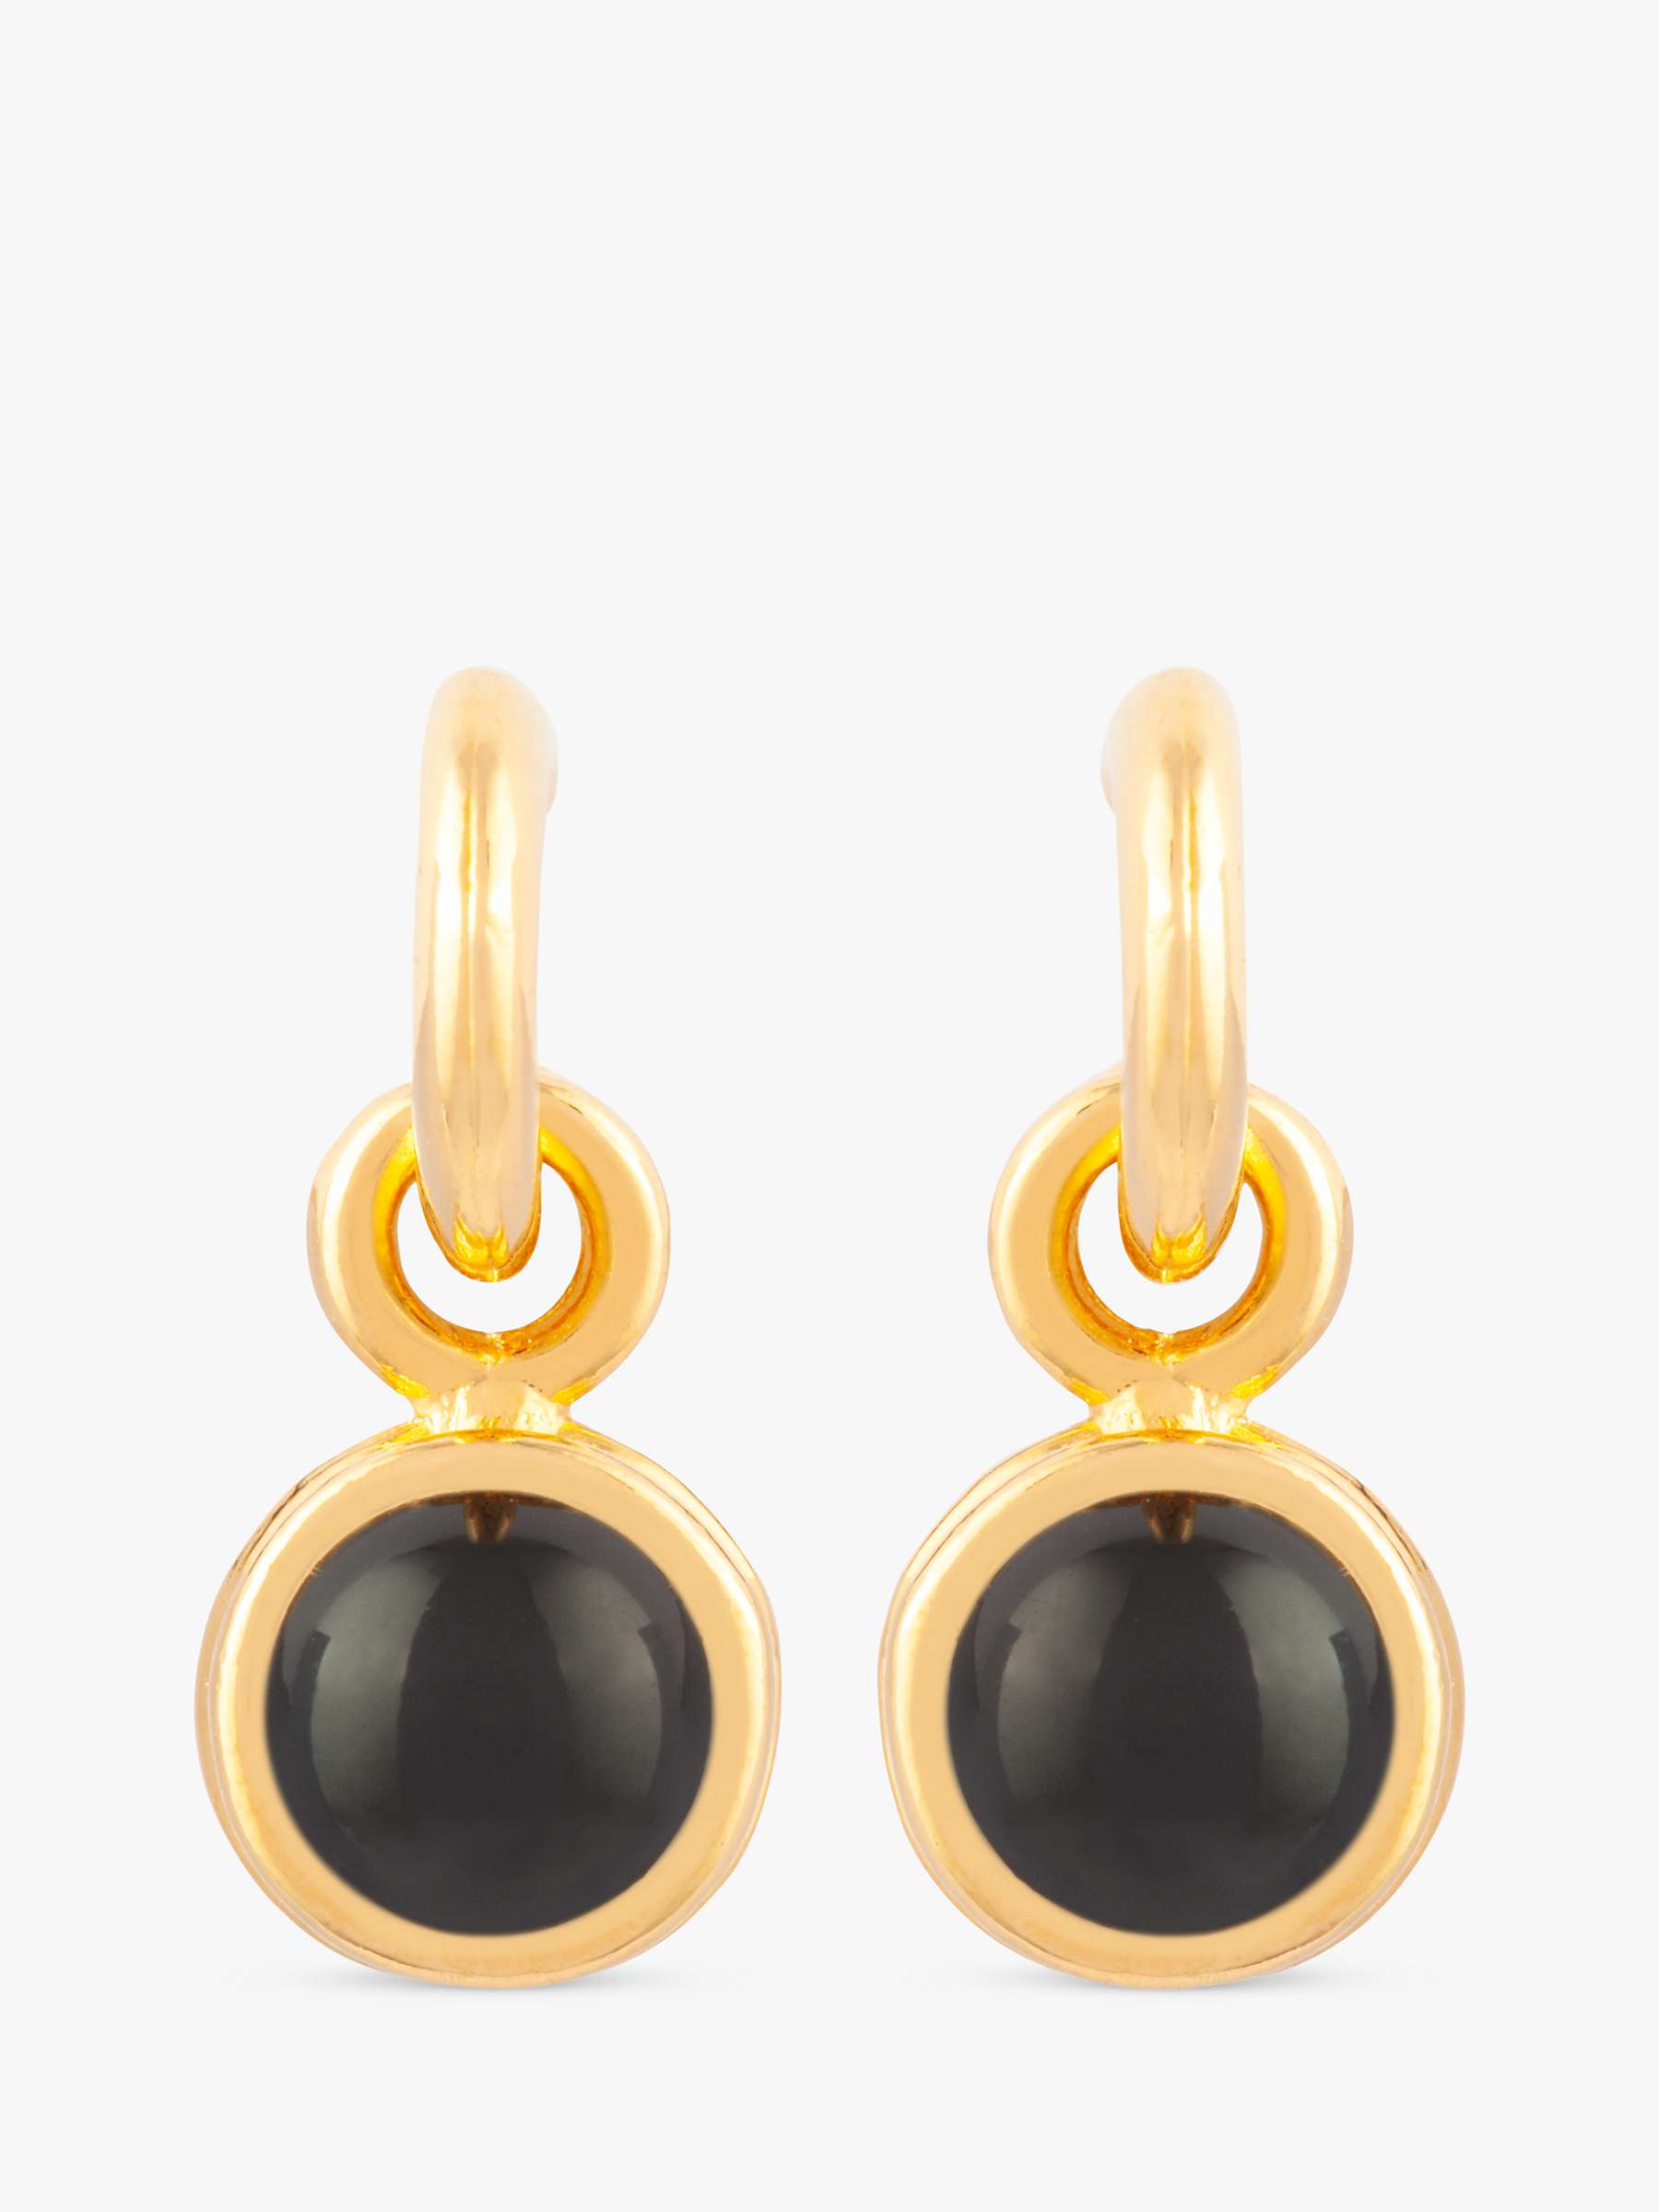 Buy Susan Caplan Vintage Rediscovered Collection Drop Hoop Earrings, Dated Circa 1990s, Gold/Black Online at johnlewis.com